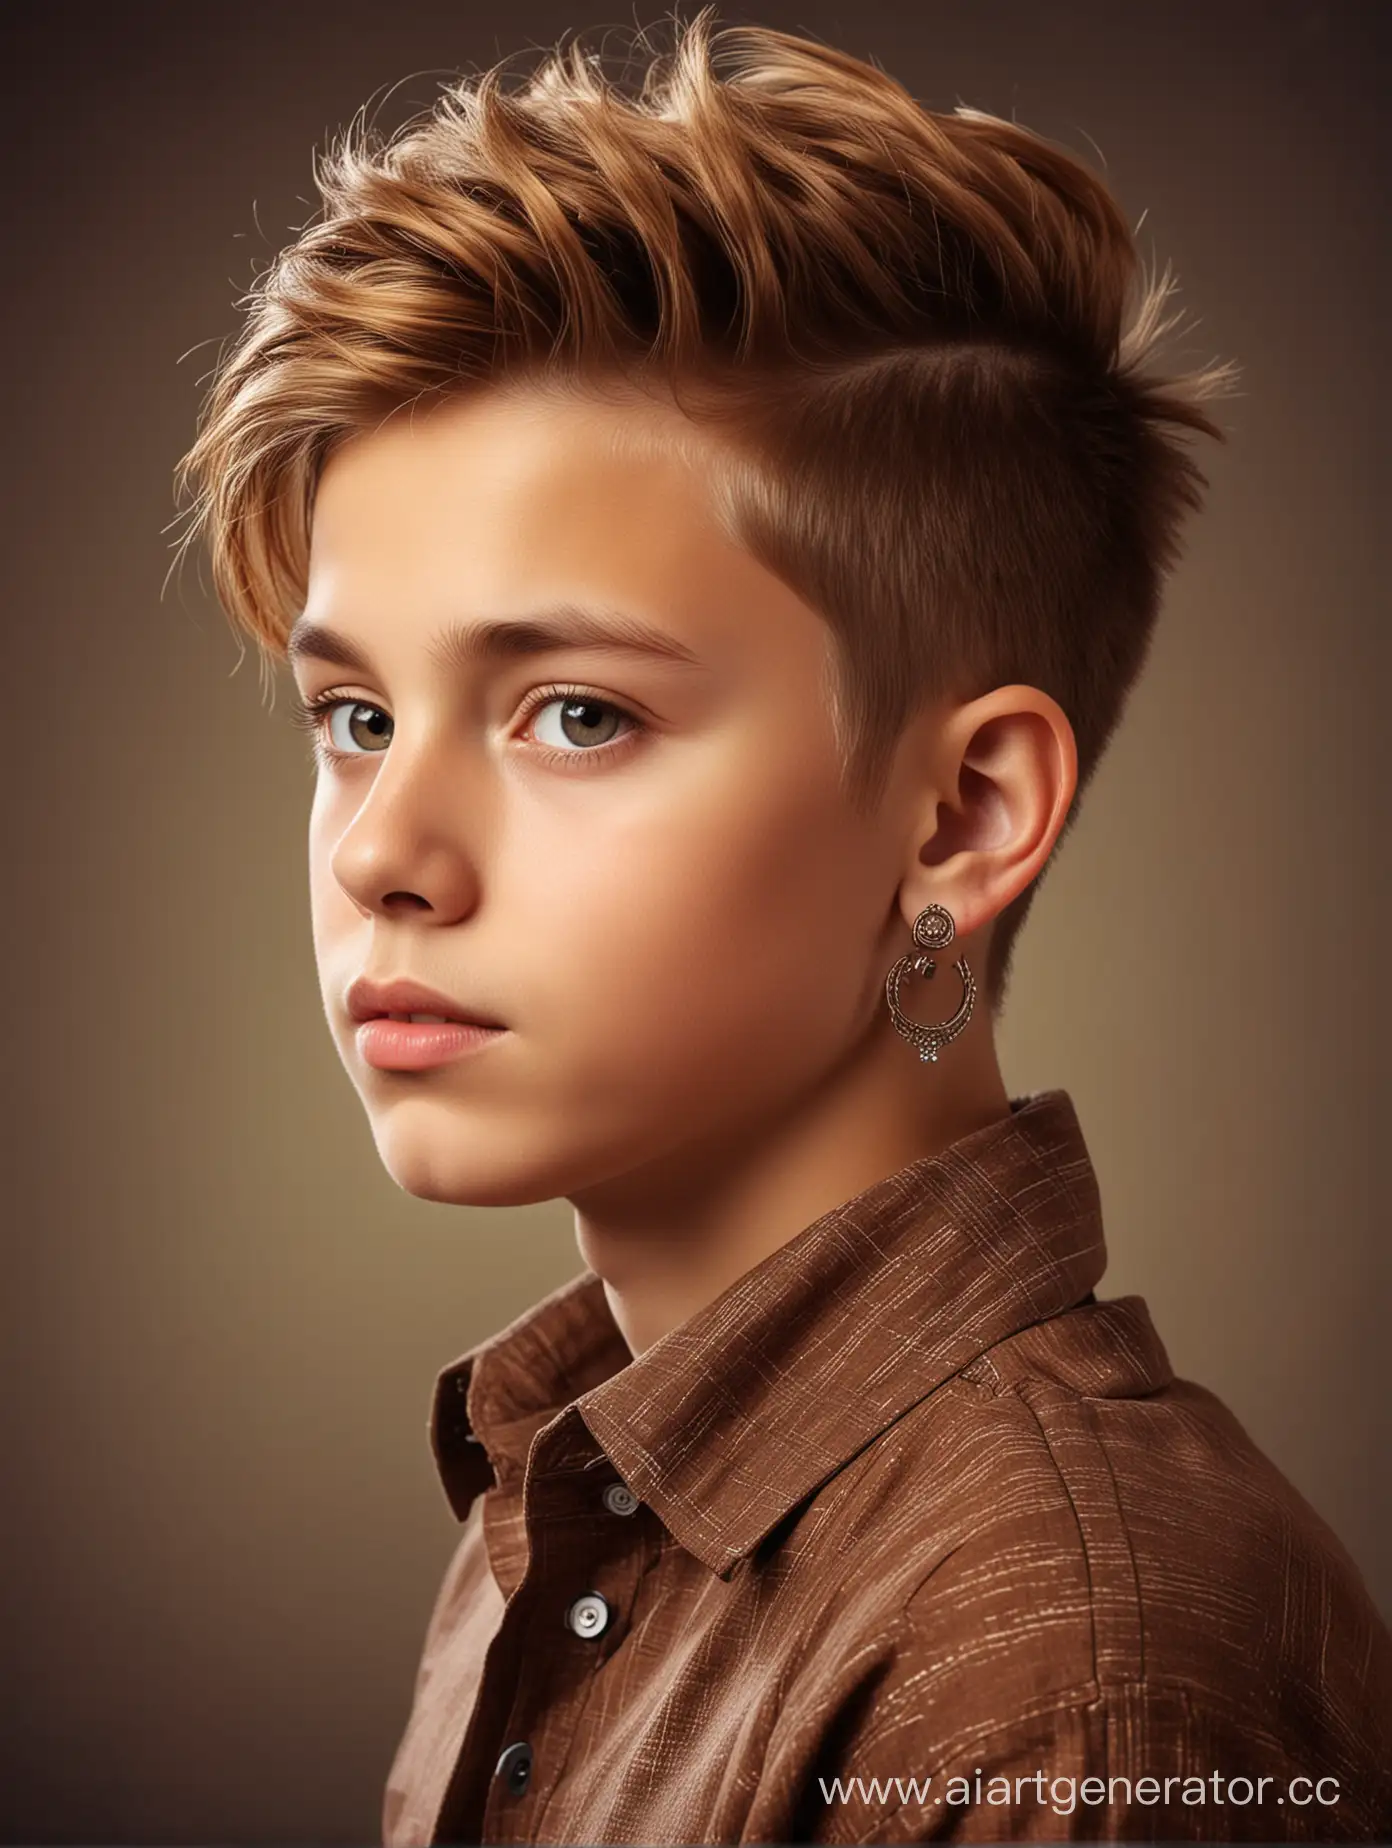 Stylish-12YearOld-Boy-with-Tawny-Hair-and-Earrings-Artistic-Portrait-in-Modern-Style